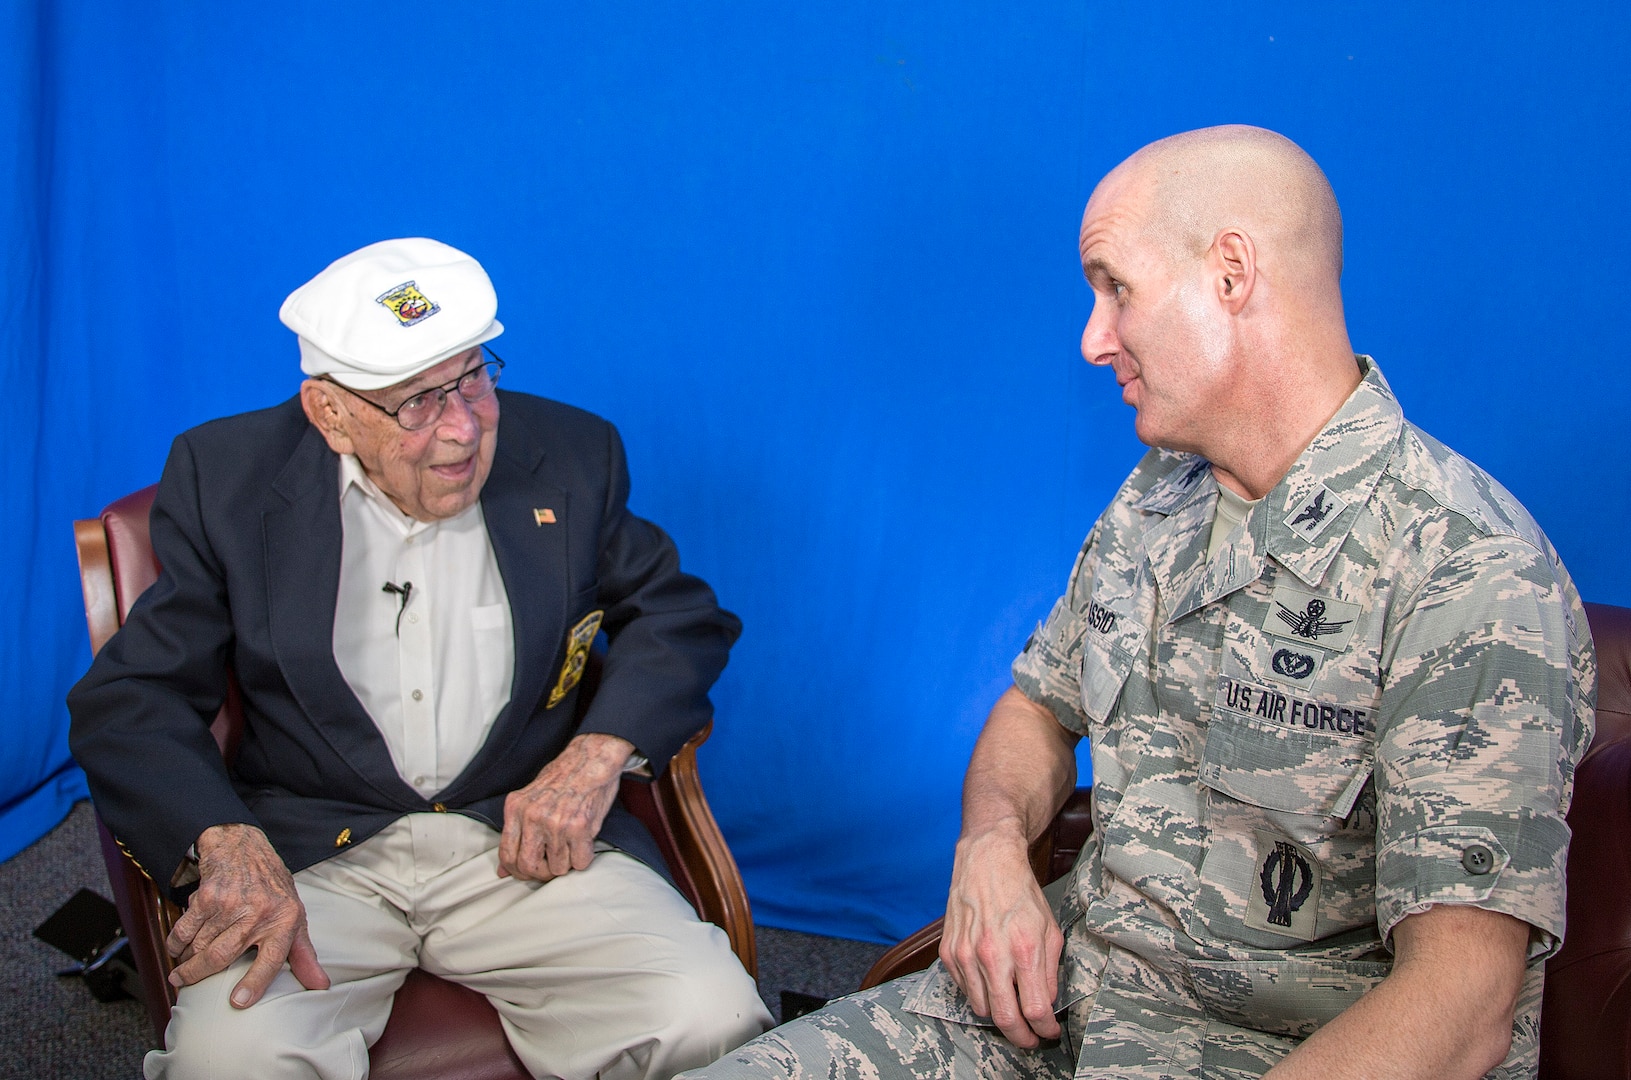 Retired Air Force Lt. Col. Richard Cole, last surviving member of Doolittle’s Raiders, speaks with Col. Michael Assid during an interview Feb. 1 at Joint Base San Antonio-Lackland, Texas. Assid is assigned to Air Force Space Command 310th Space Wing, the modern-day successor to Cole’s former unit, 310th Bombardment Group.